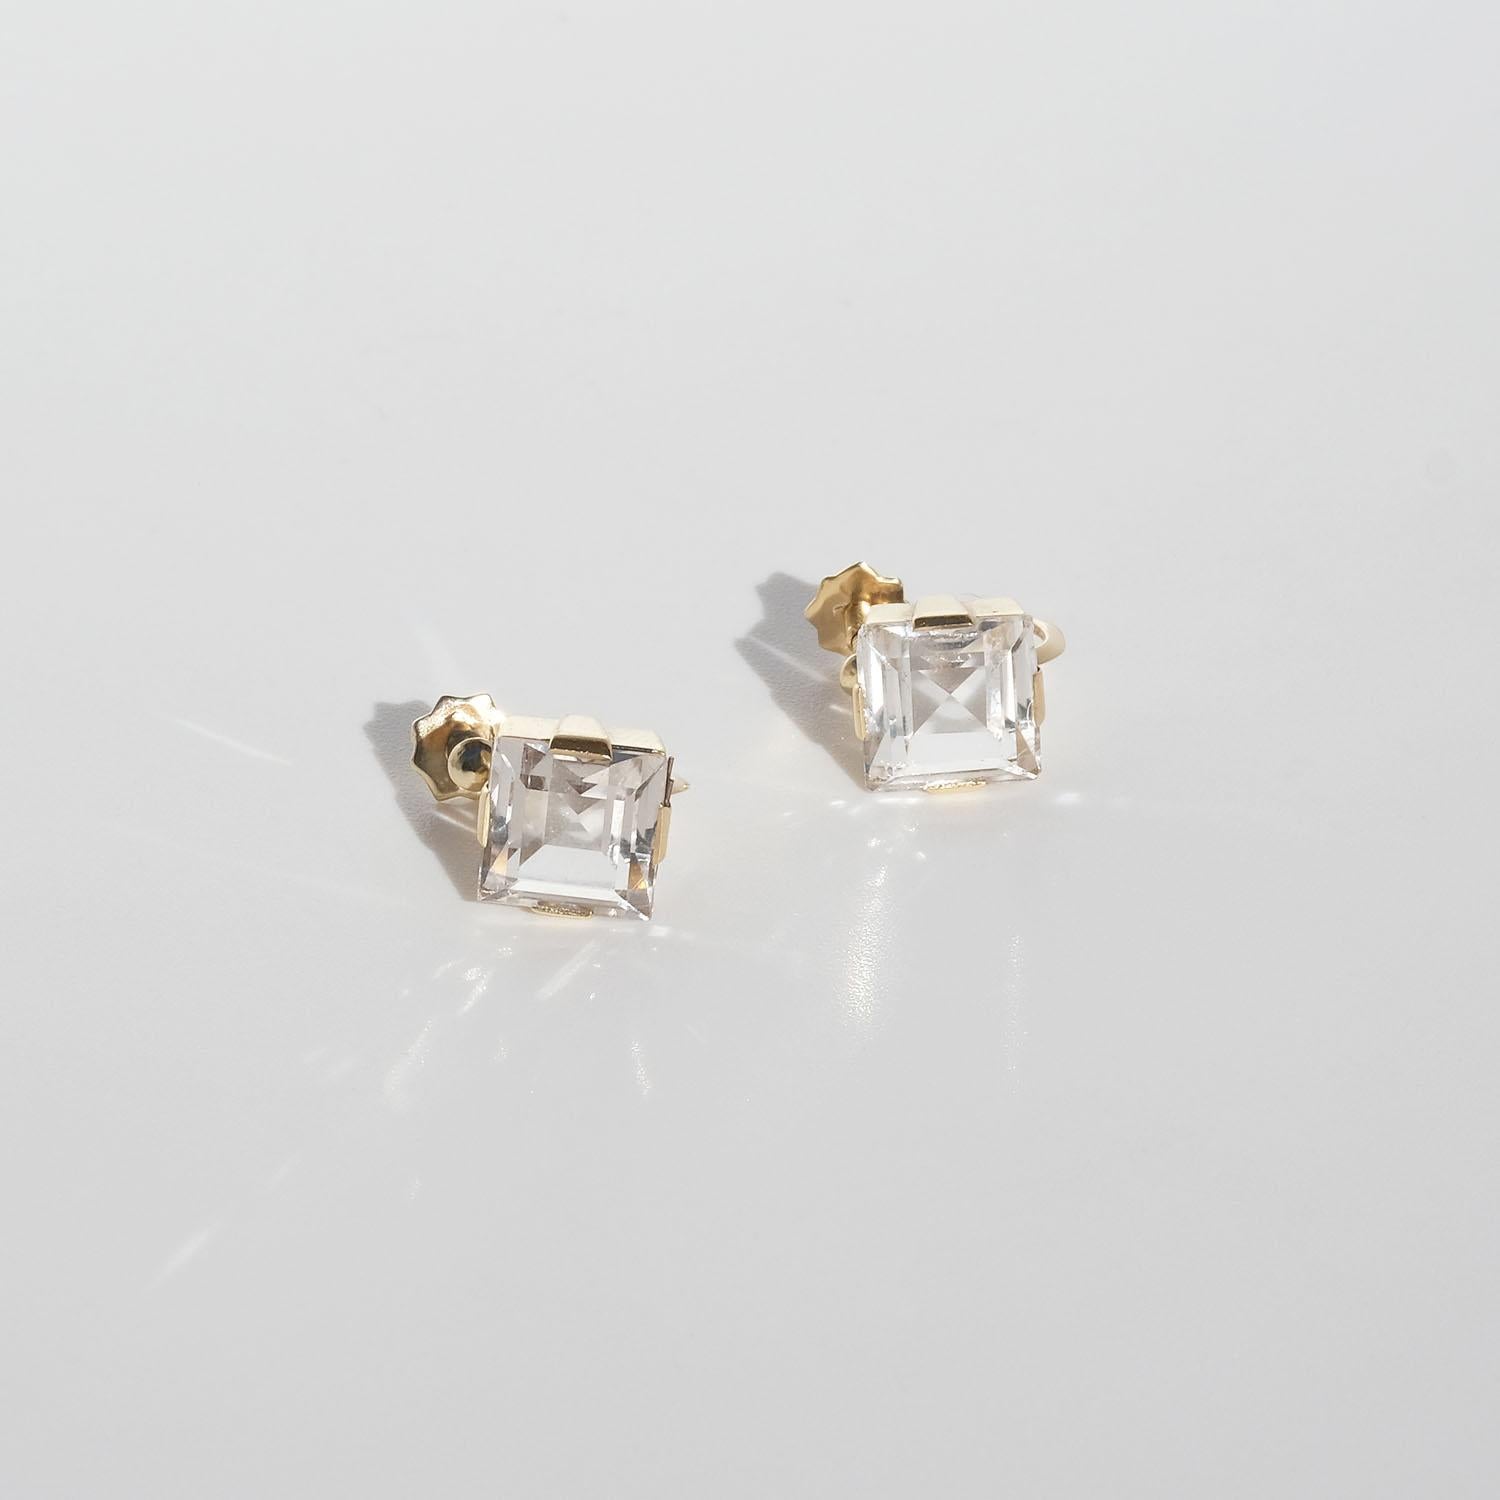 Vintage 18k Gold and Rock Chrystal Earrings Made Year 1945 In Good Condition For Sale In Stockholm, SE